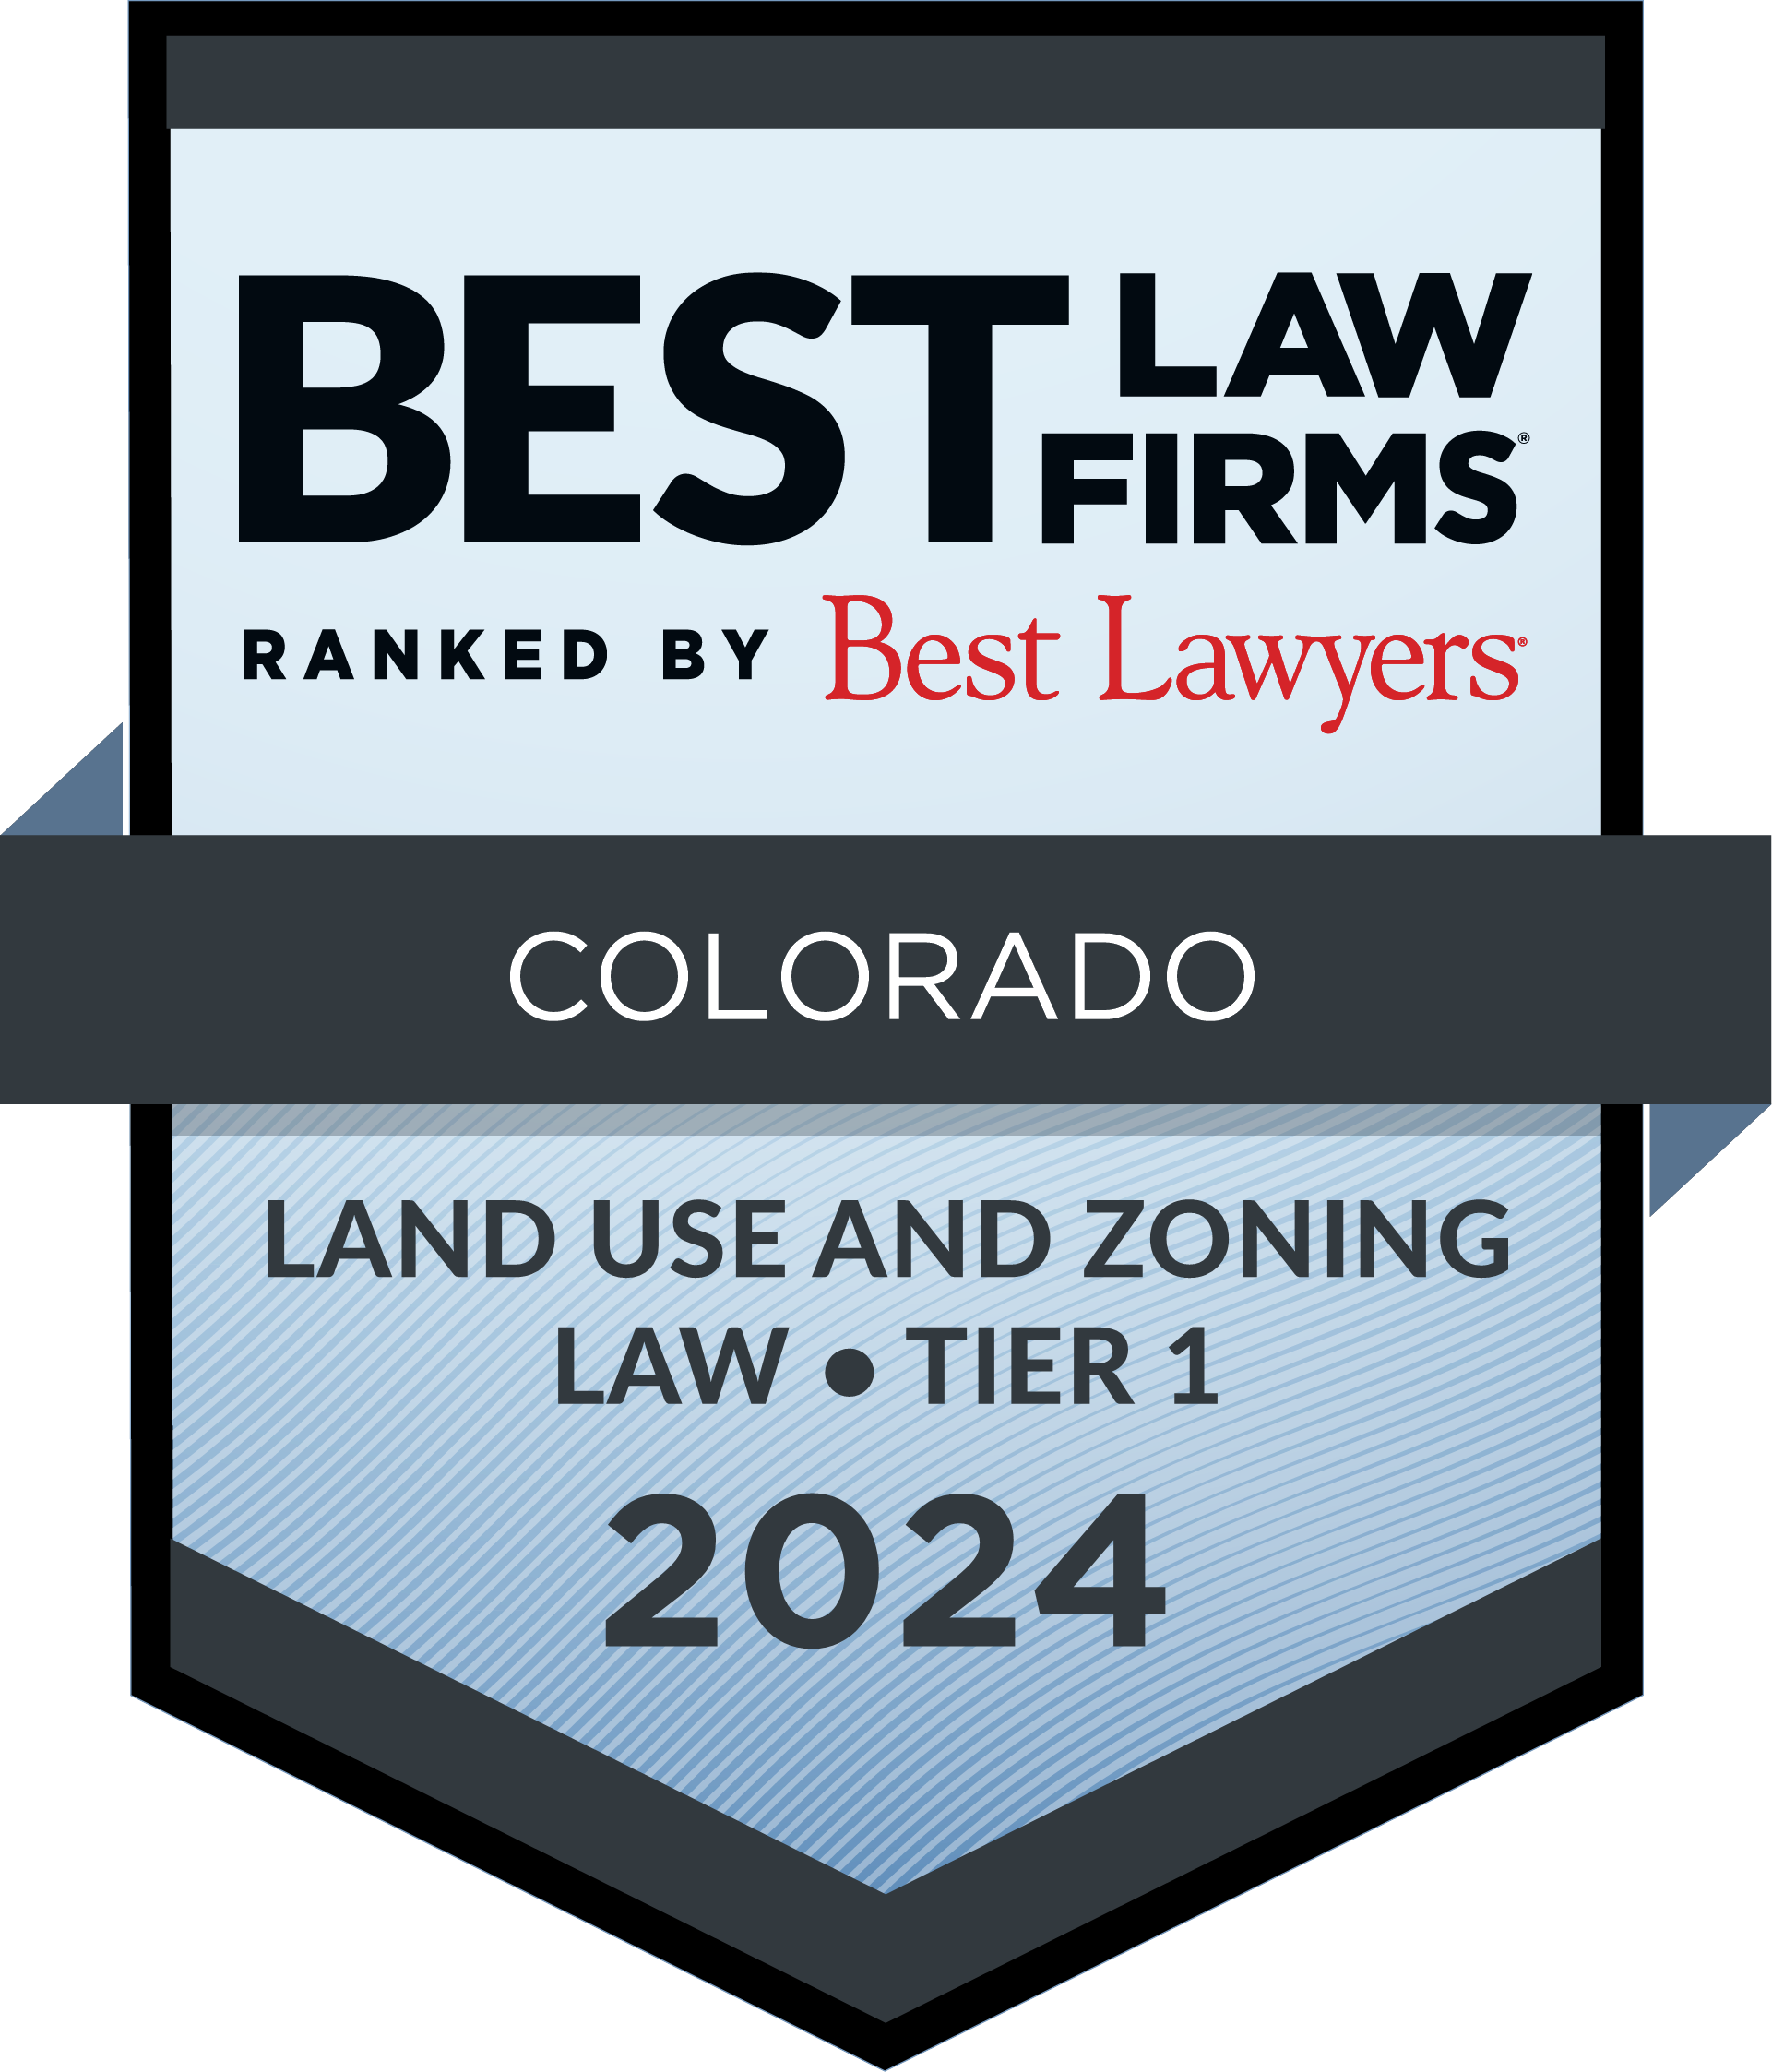 Best Lawyers | Best Law Firms | Rankend By Best Lawyers Colorado Land Use And Zoning Law Tirer 1 2024